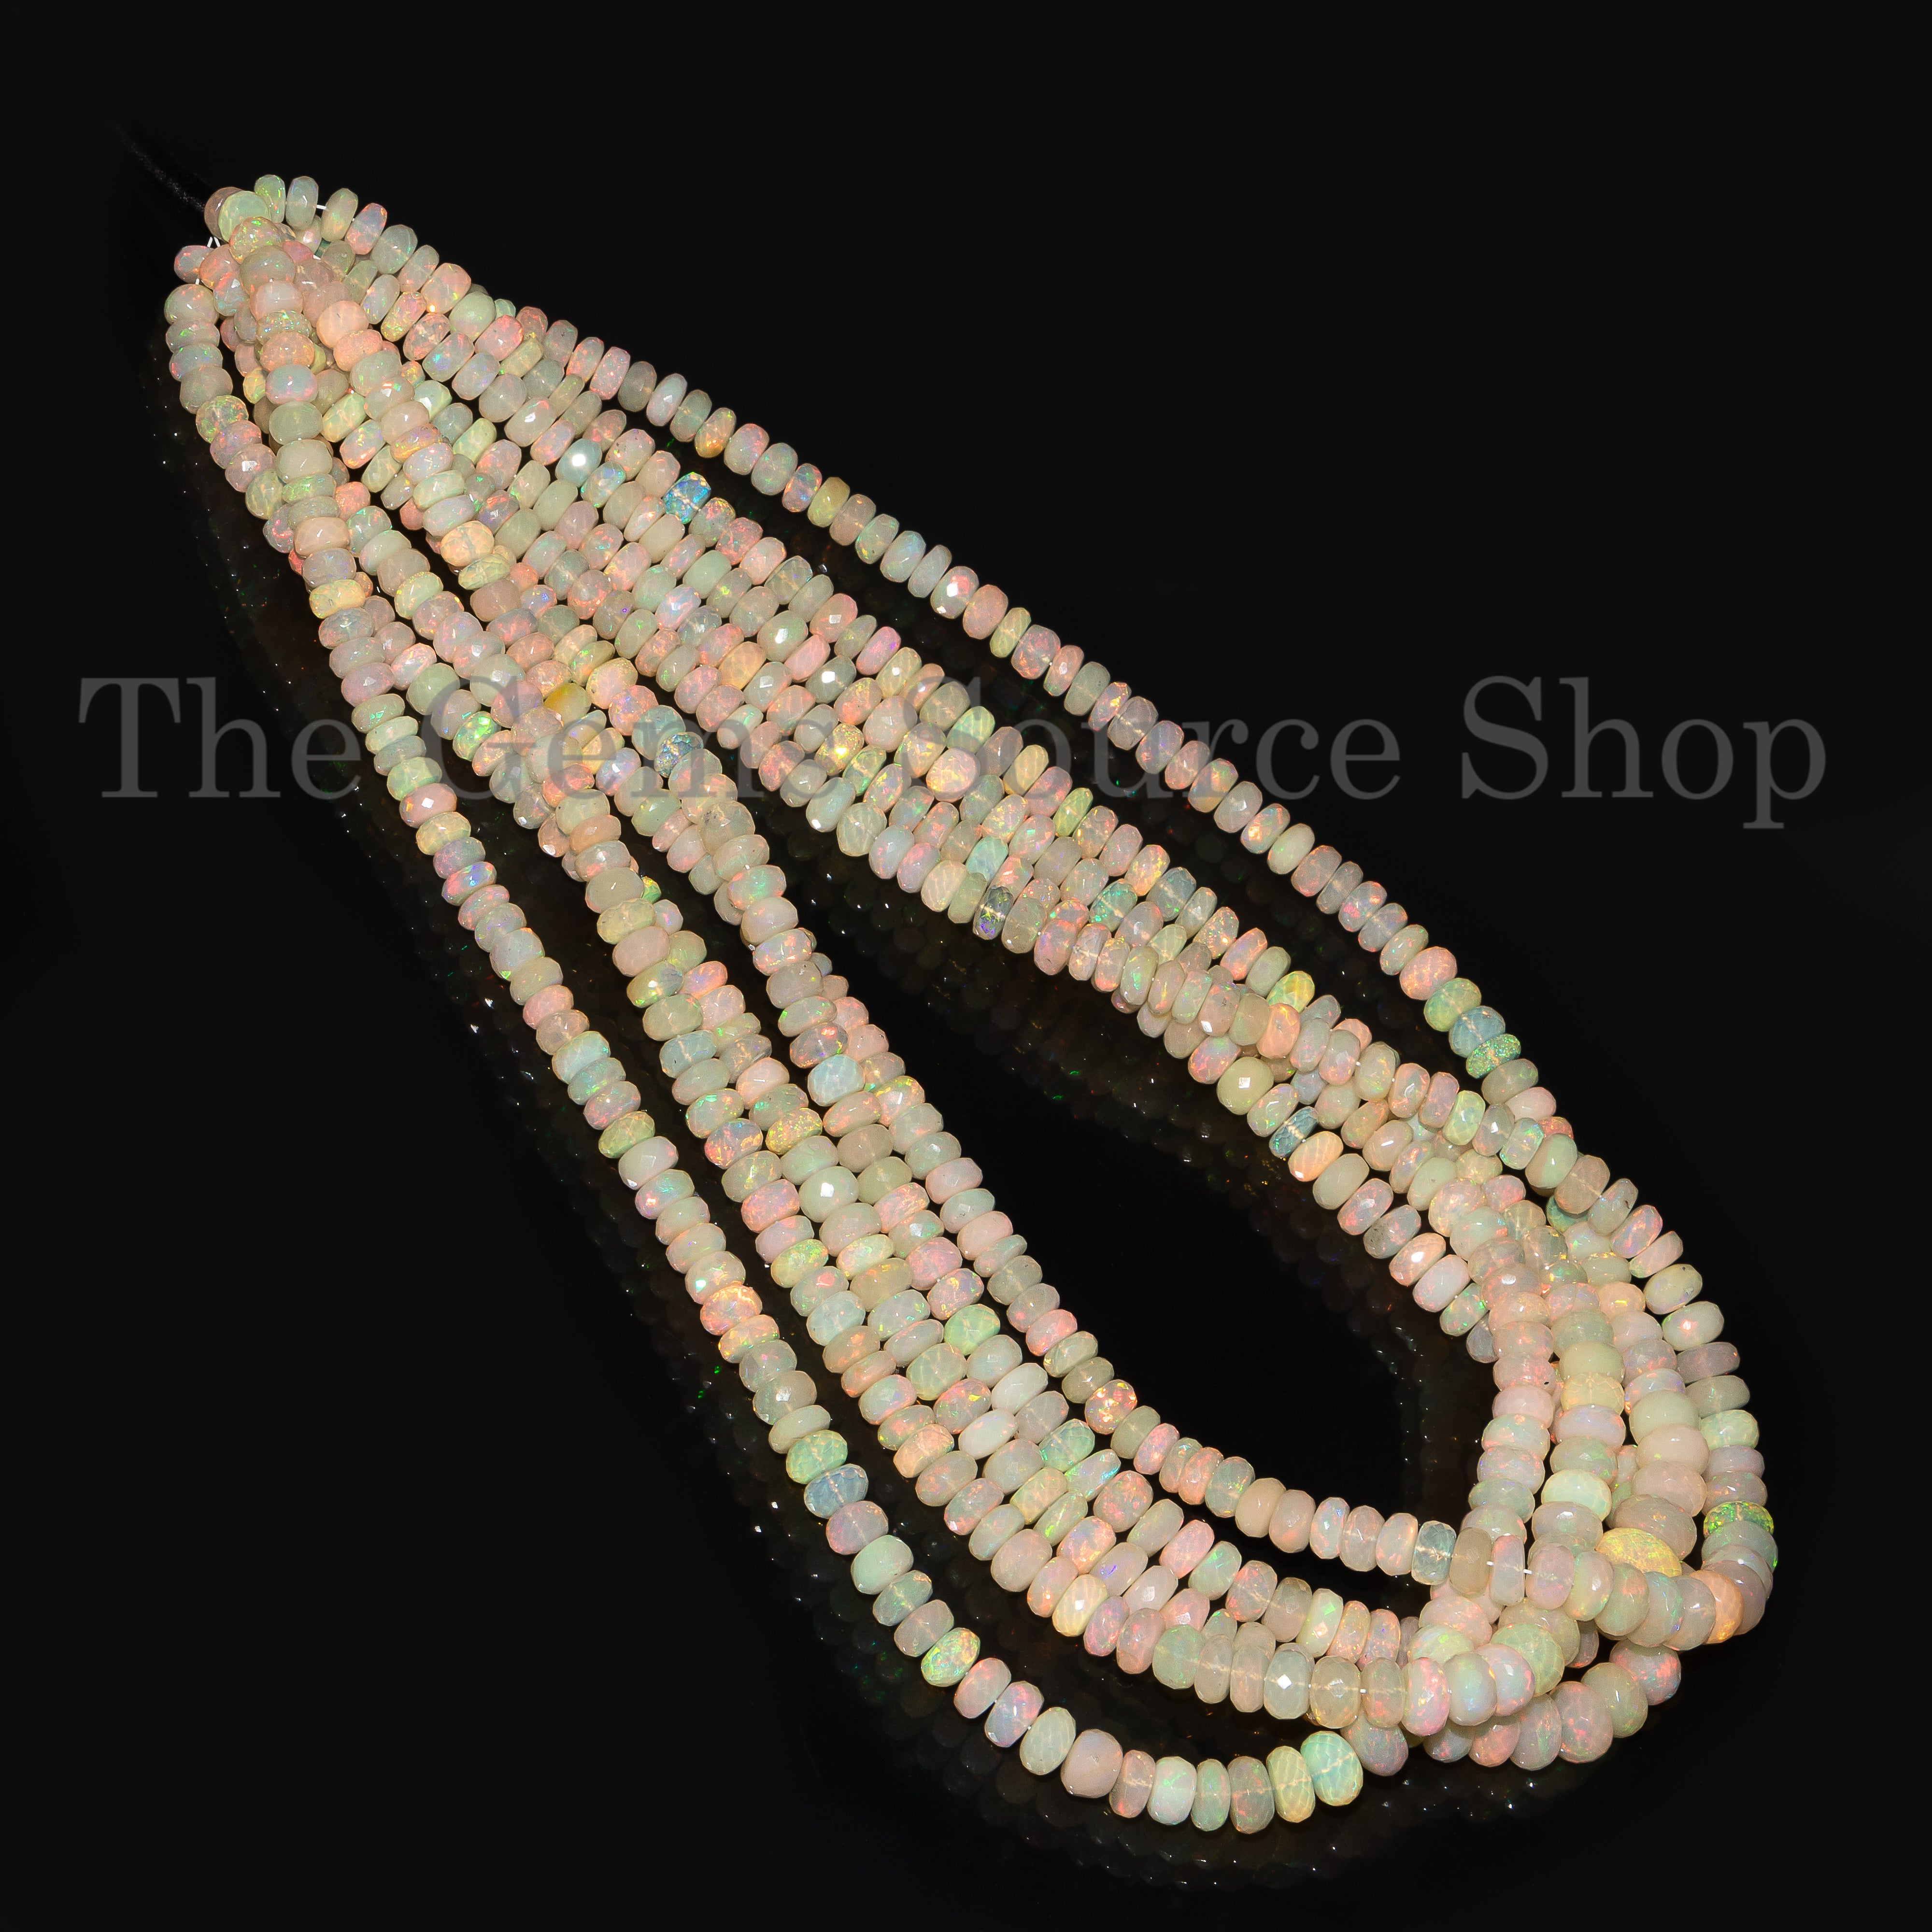 Big Size Ethiopian Opal Faceted Rondelle Shape Beads, Fire Opal Gemstone For Jewelry Making, Natural Gemstone Beads